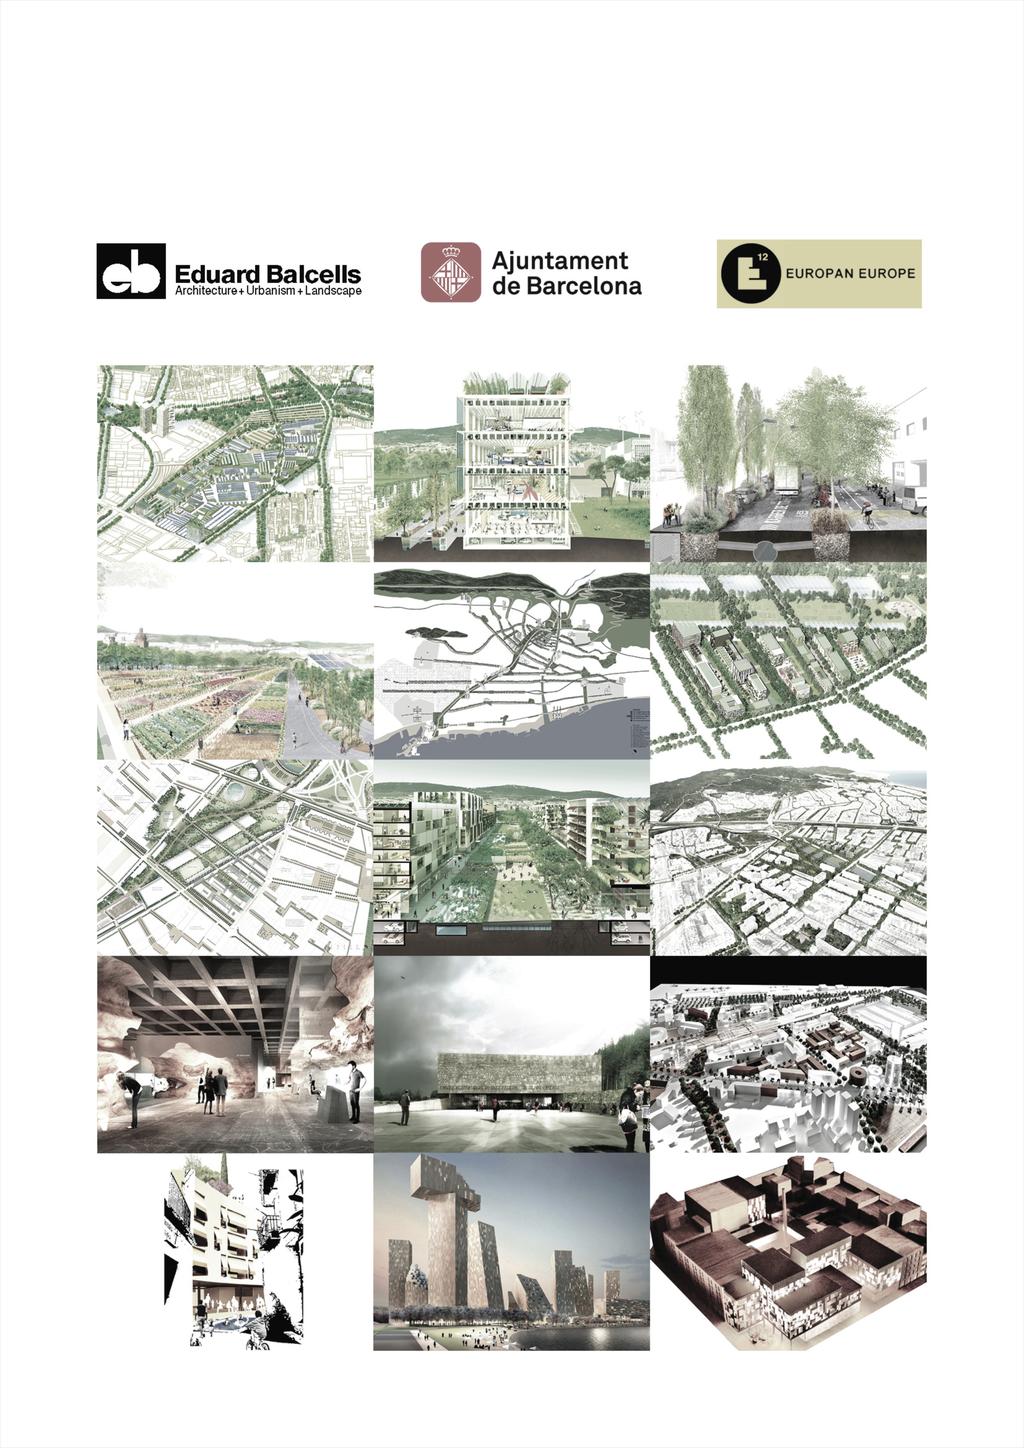 strategic regional planning, sustainable urban design and architecture Eduard Balcells Barcelona, Spain Author of The New Urban Fabrik urban study commissioned by Barcelona City Council (2014) First